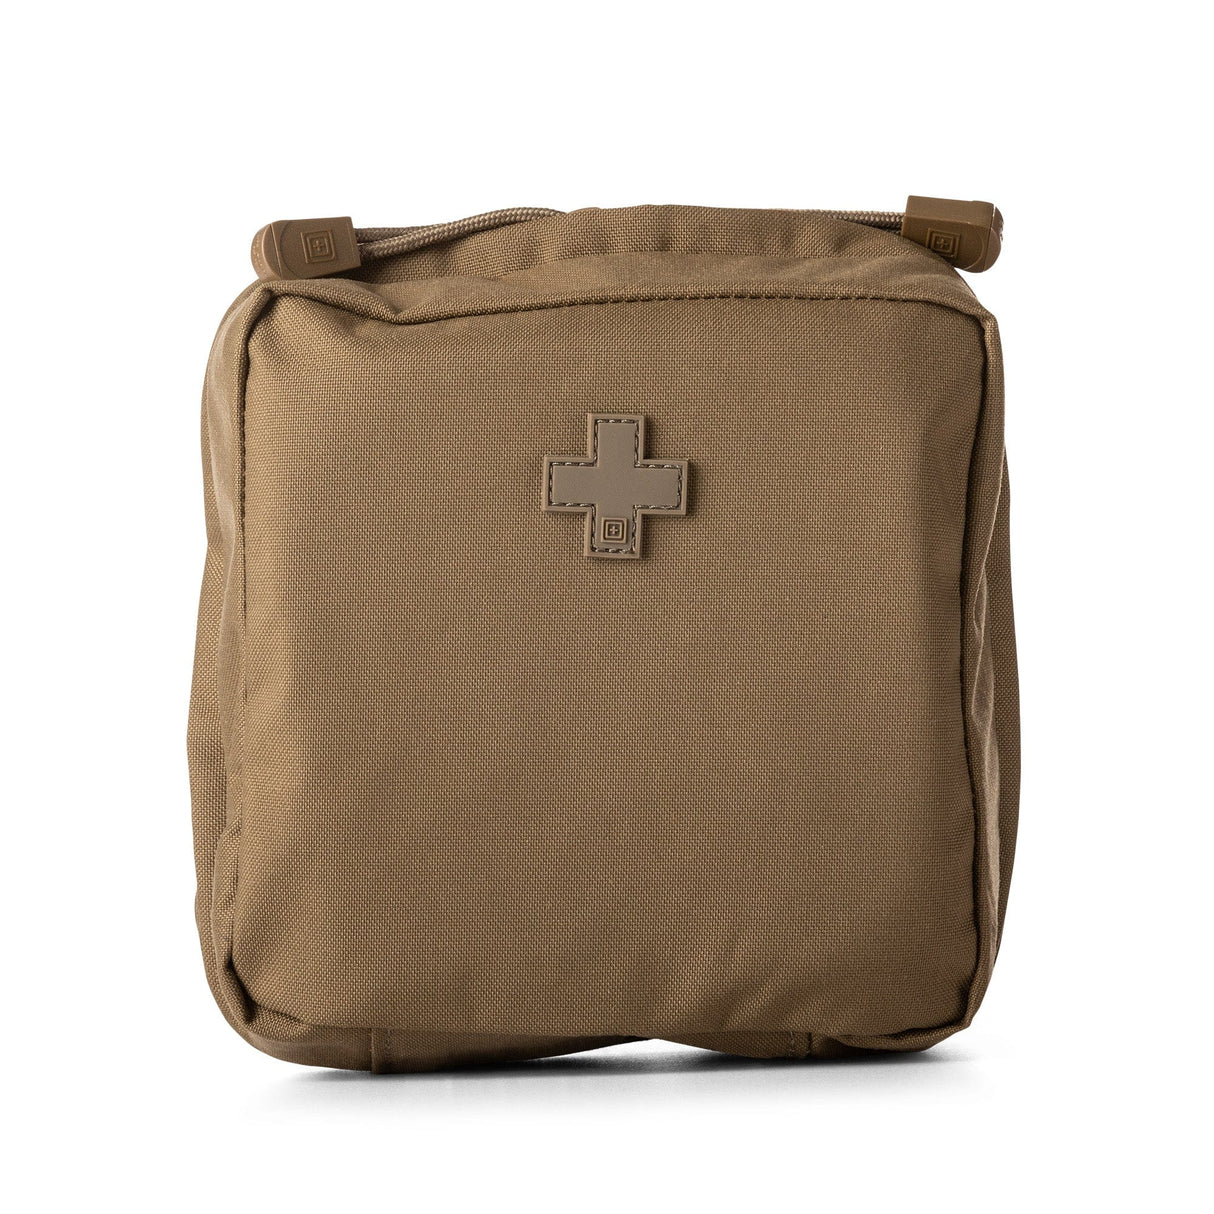 6 x 6 MED POUCH